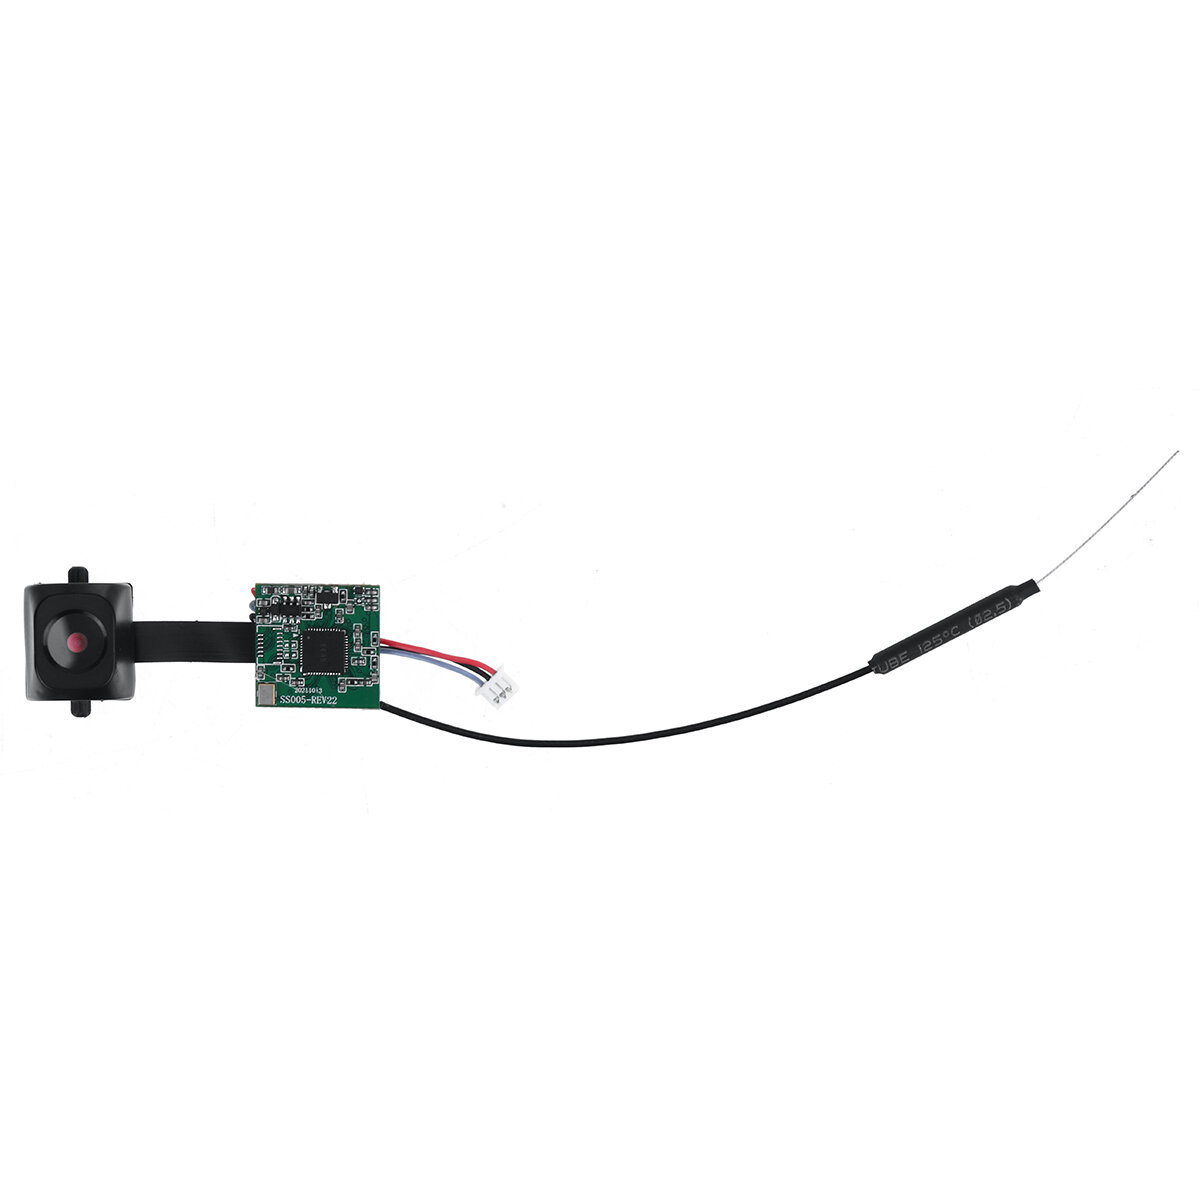 Eachine E110 720P-WIFI Image Transmission Module RC Helicopter Parts